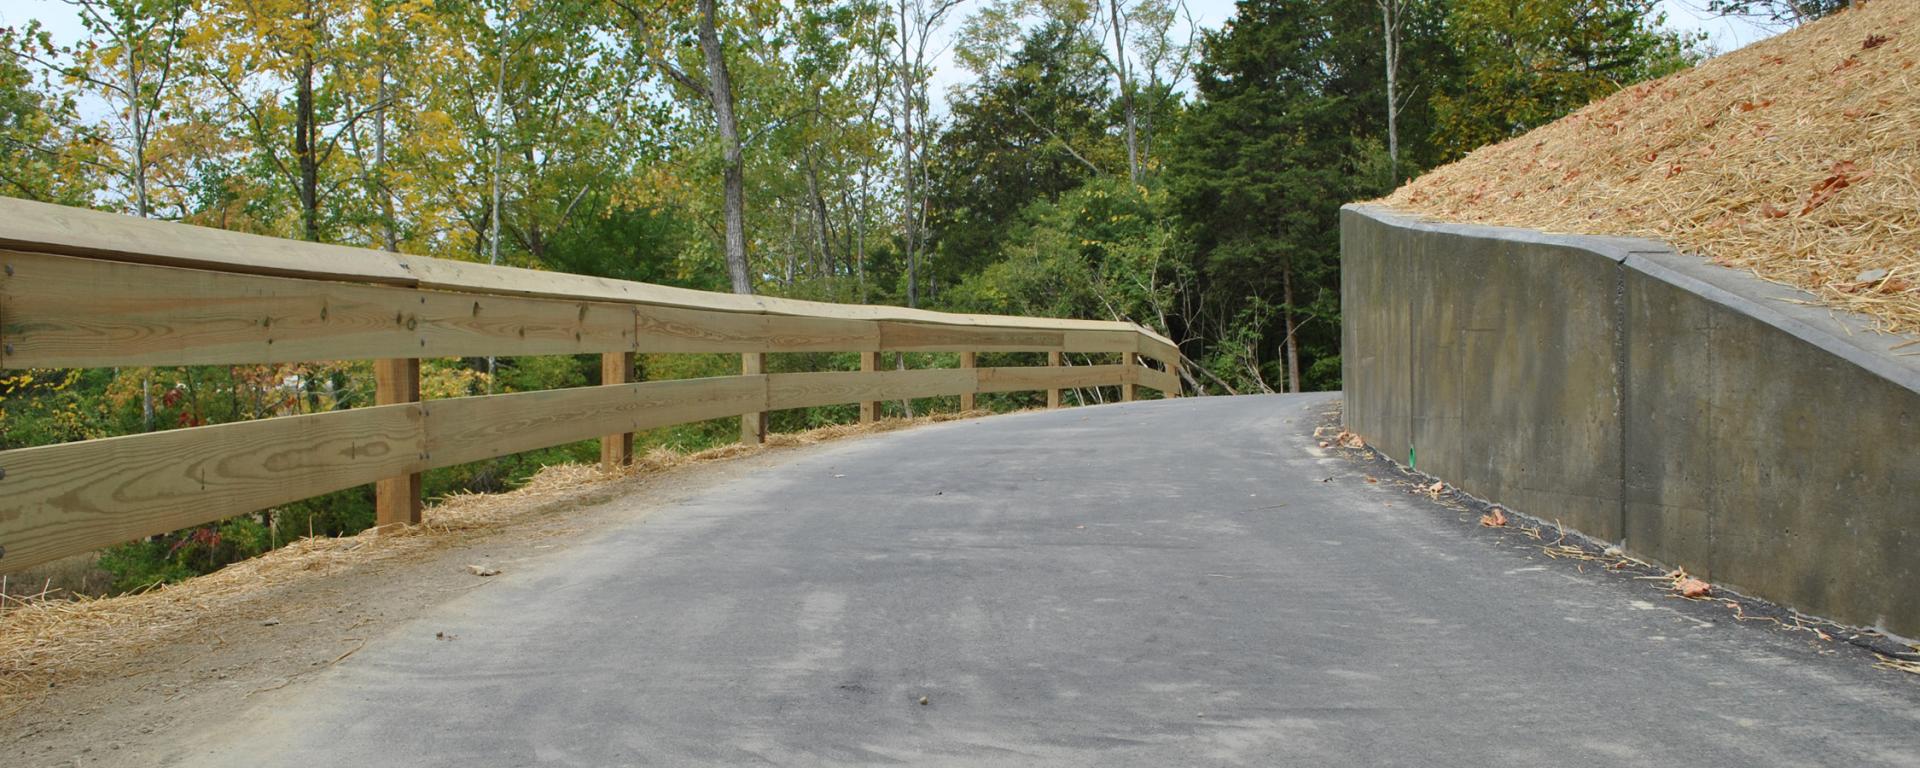 paved trail with wood railing